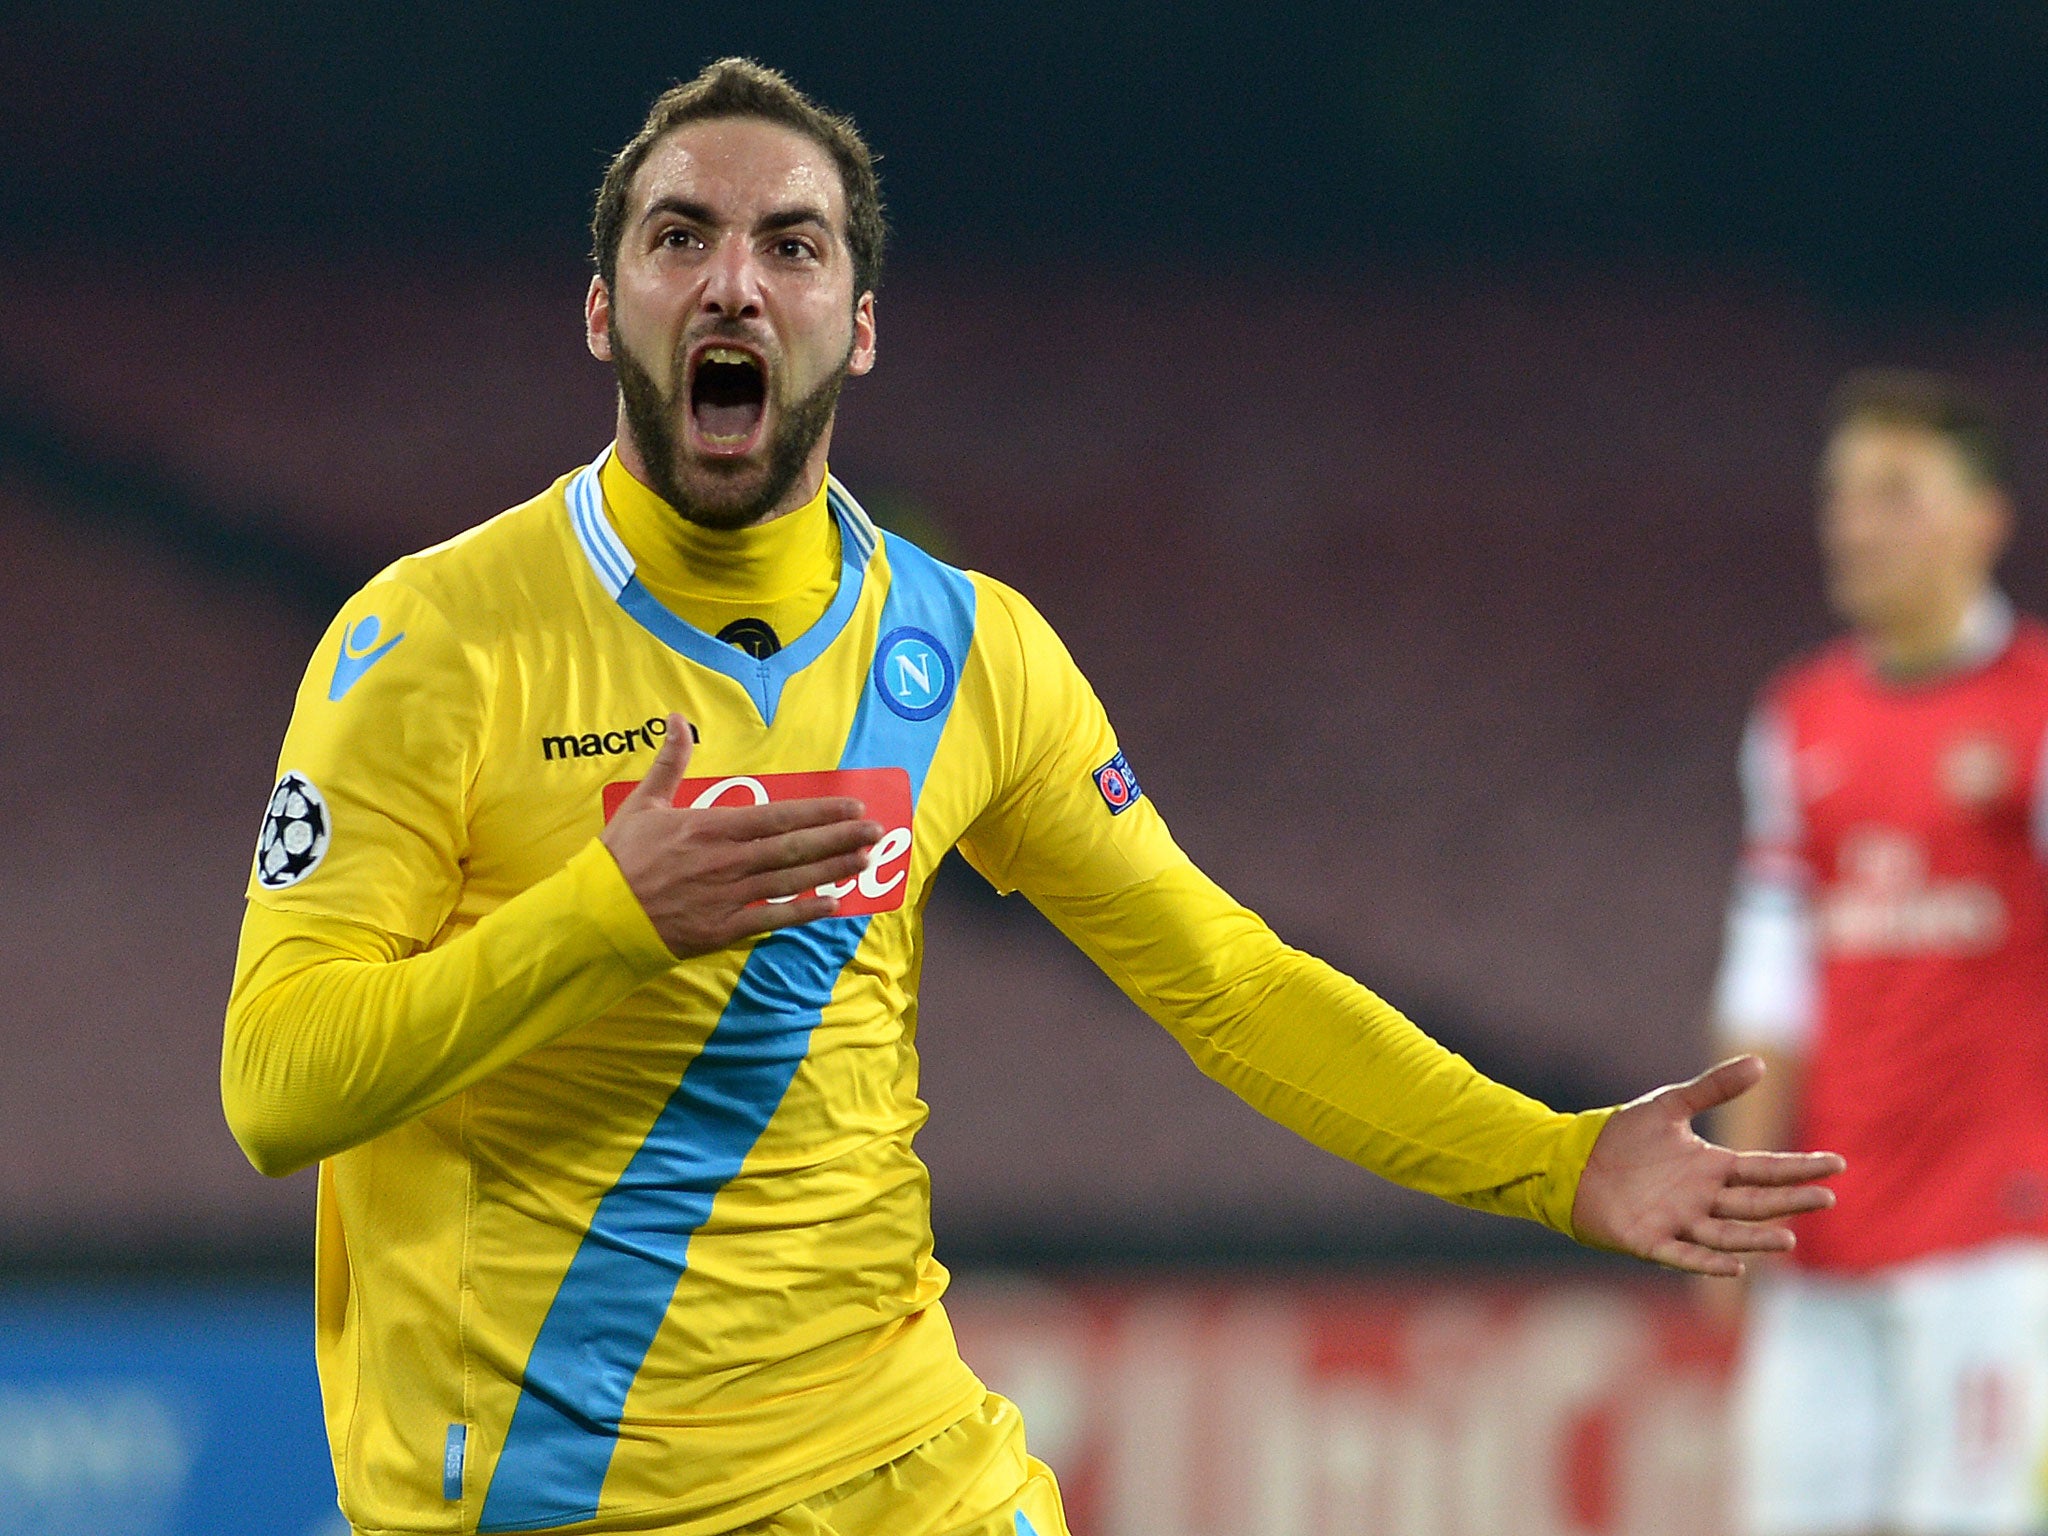 Napoli striker Gonzalo Higuain was reportedly the subject of a £50m offer from Chelsea